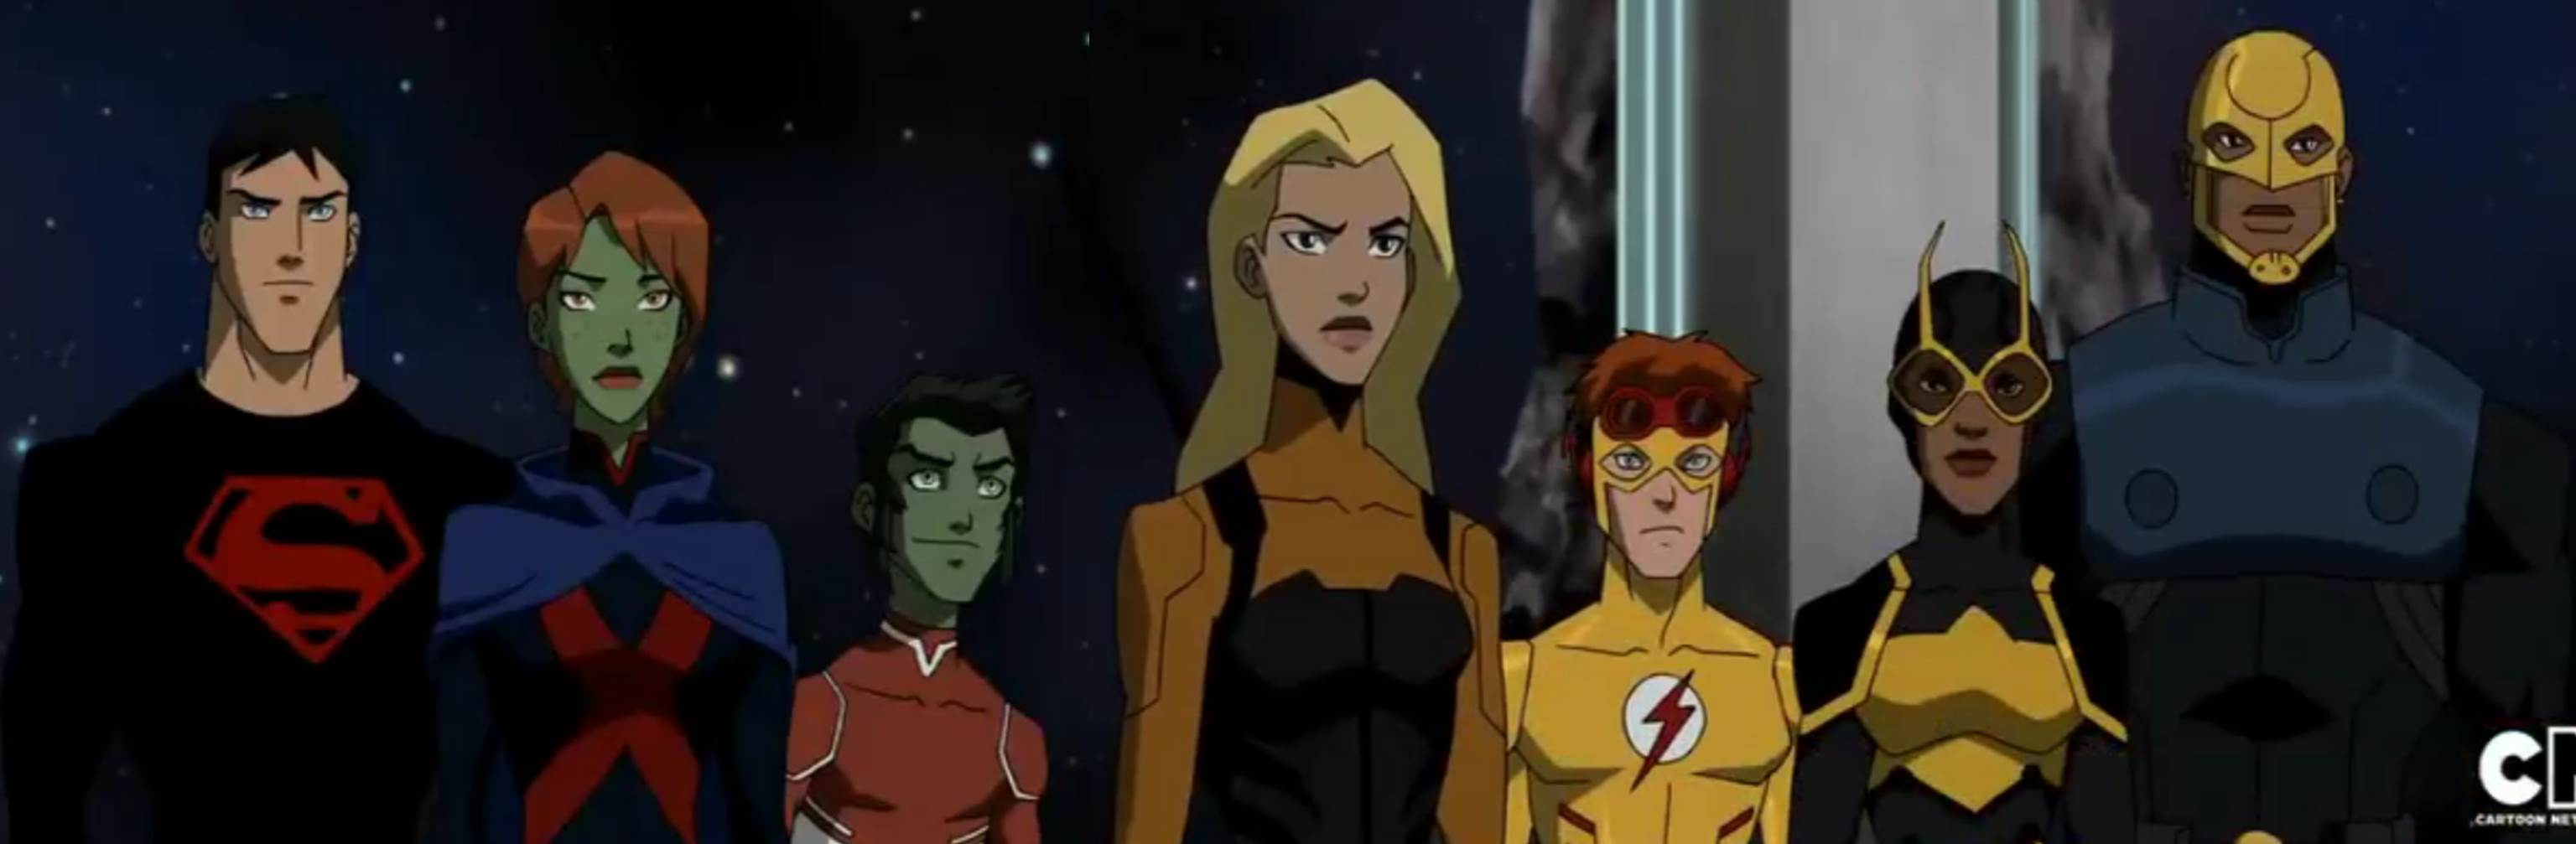 3072x1007 > Young Justice: Invasion Wallpapers